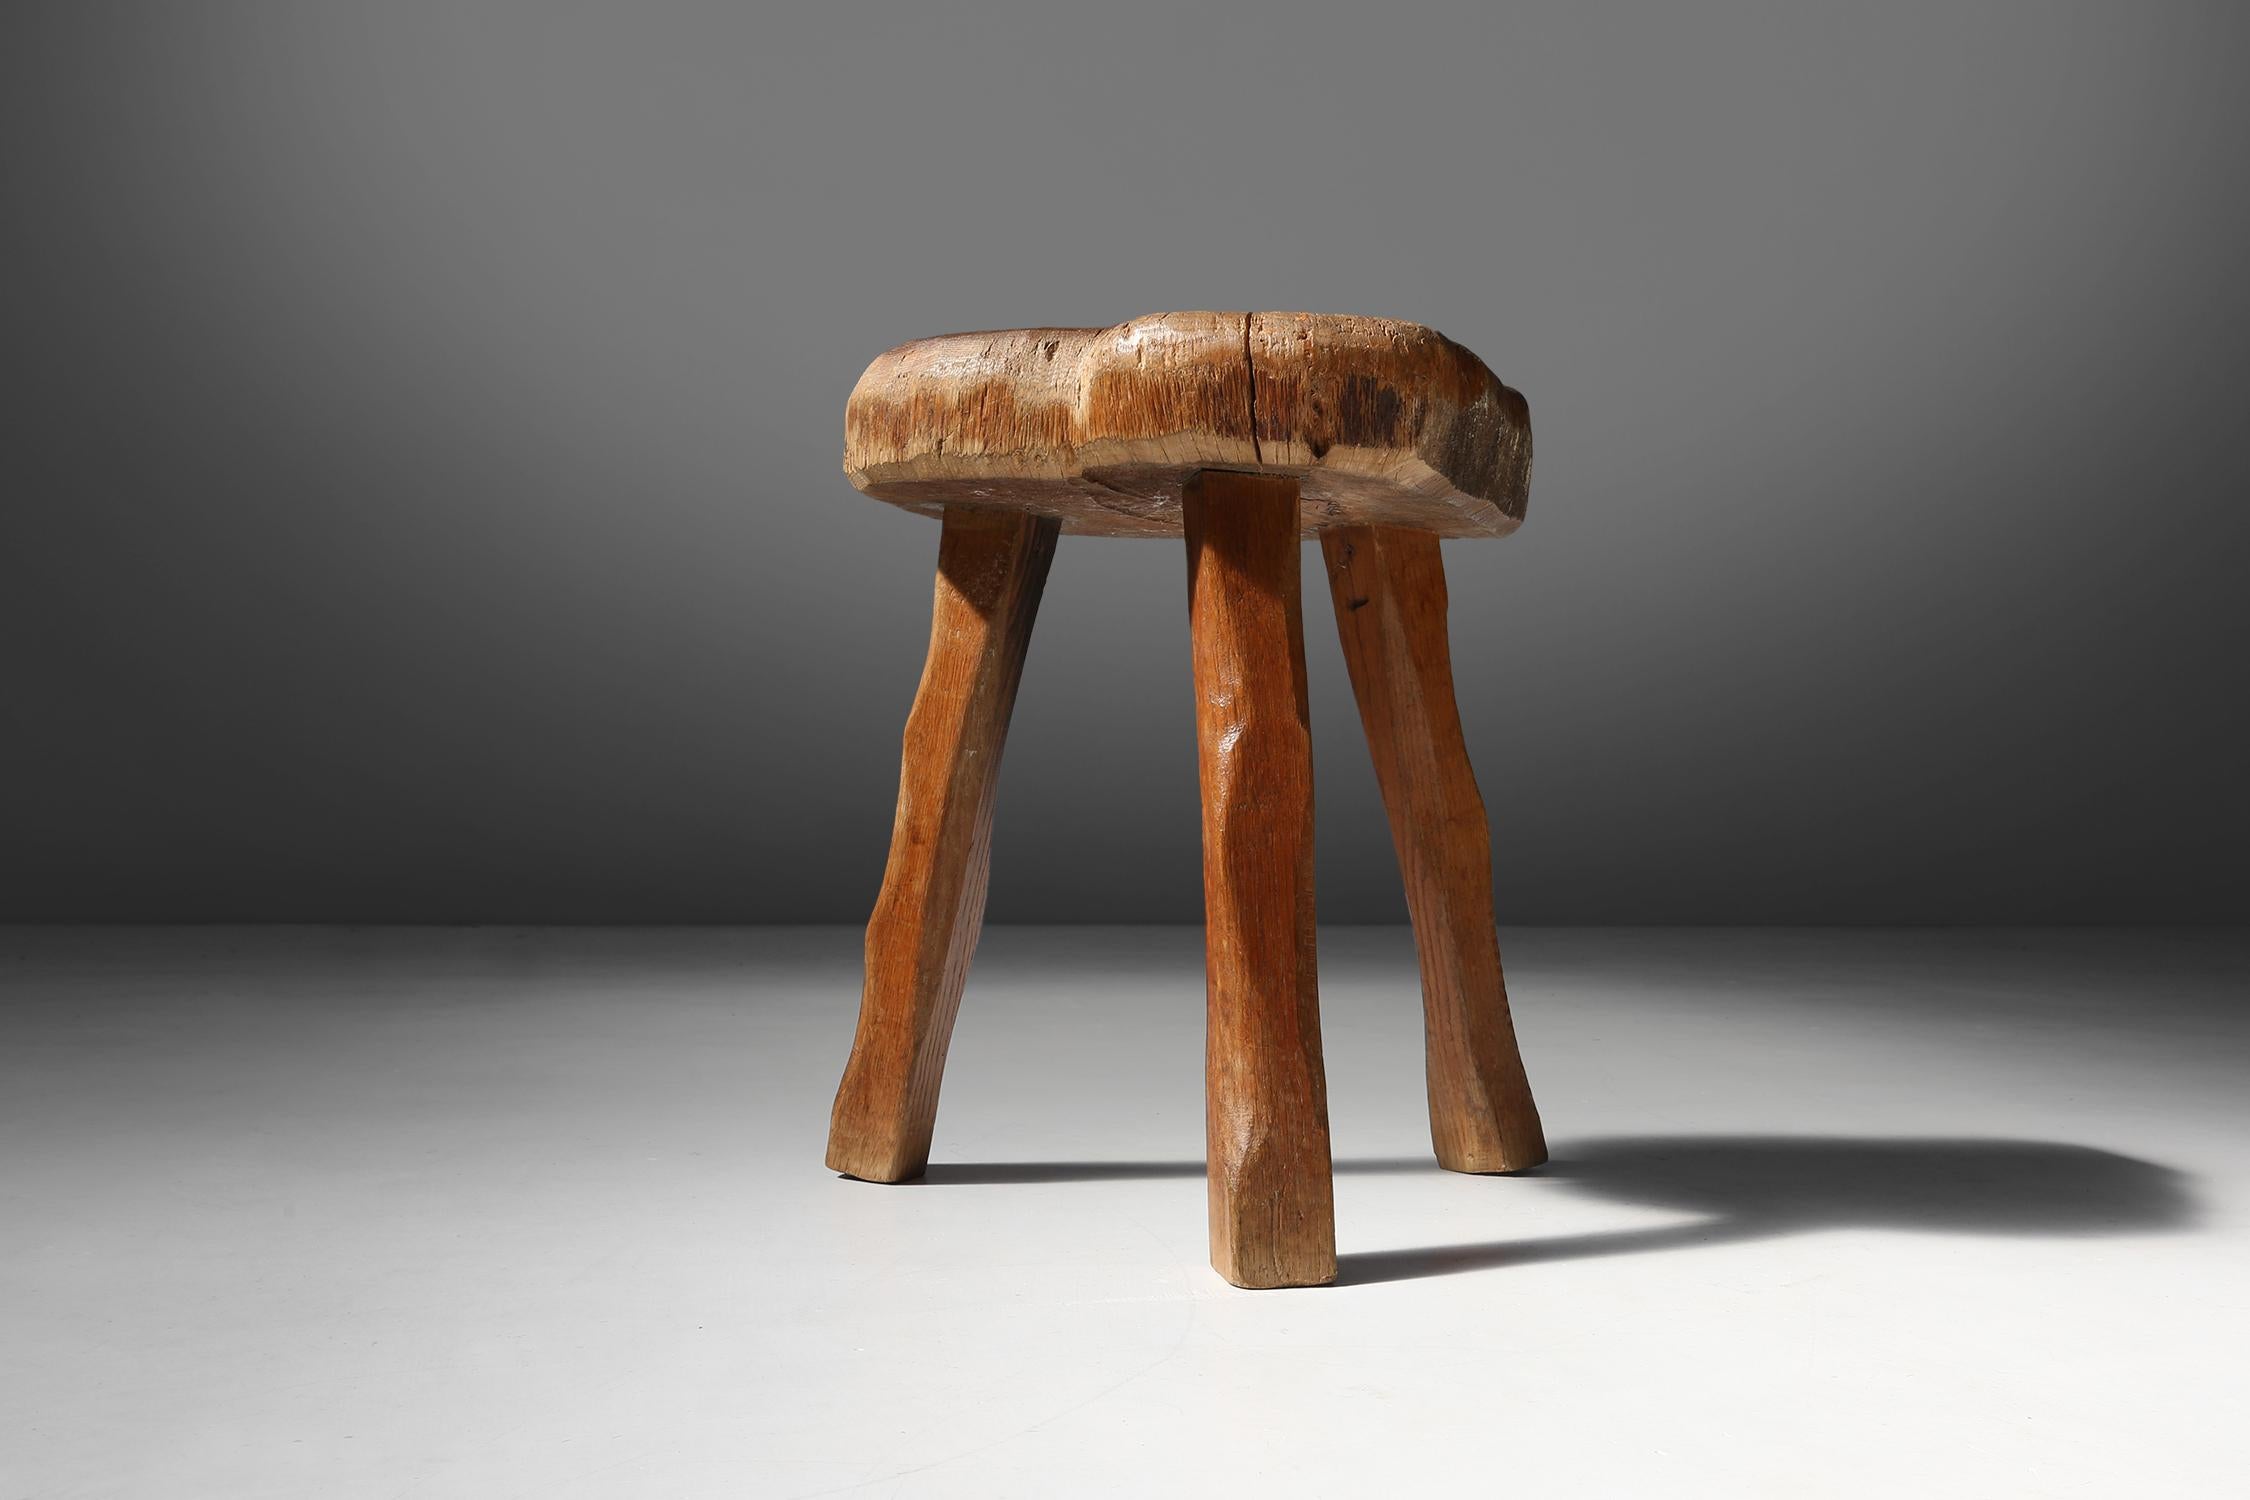 Wood Rustic wooden stool 19th century